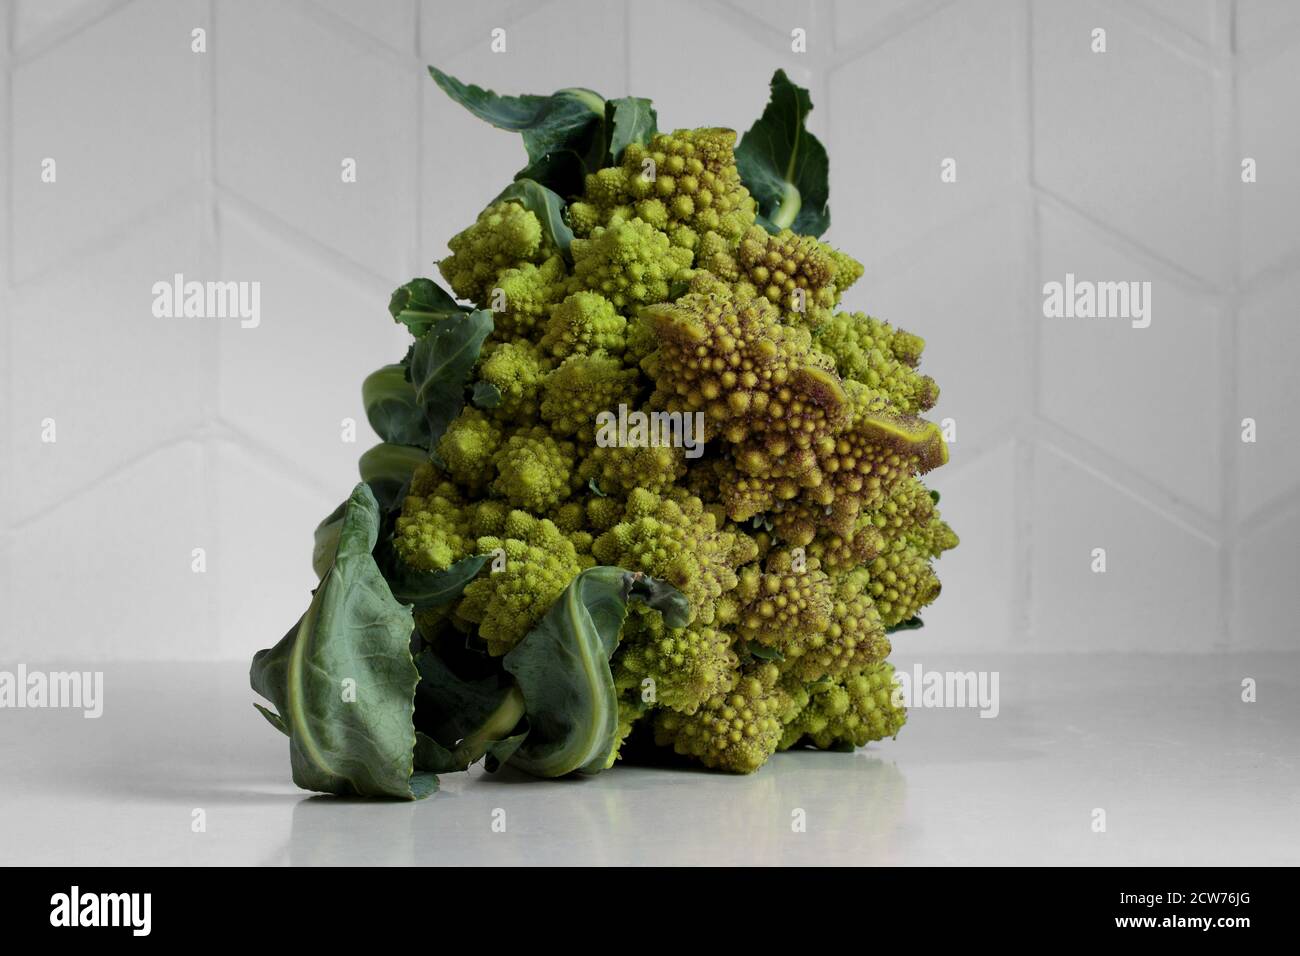 whole head of raw romesco cauliflower or broccoli with leaves on a soft white kitchen counter with a white chevron tile backsplash with natural lighti Stock Photo